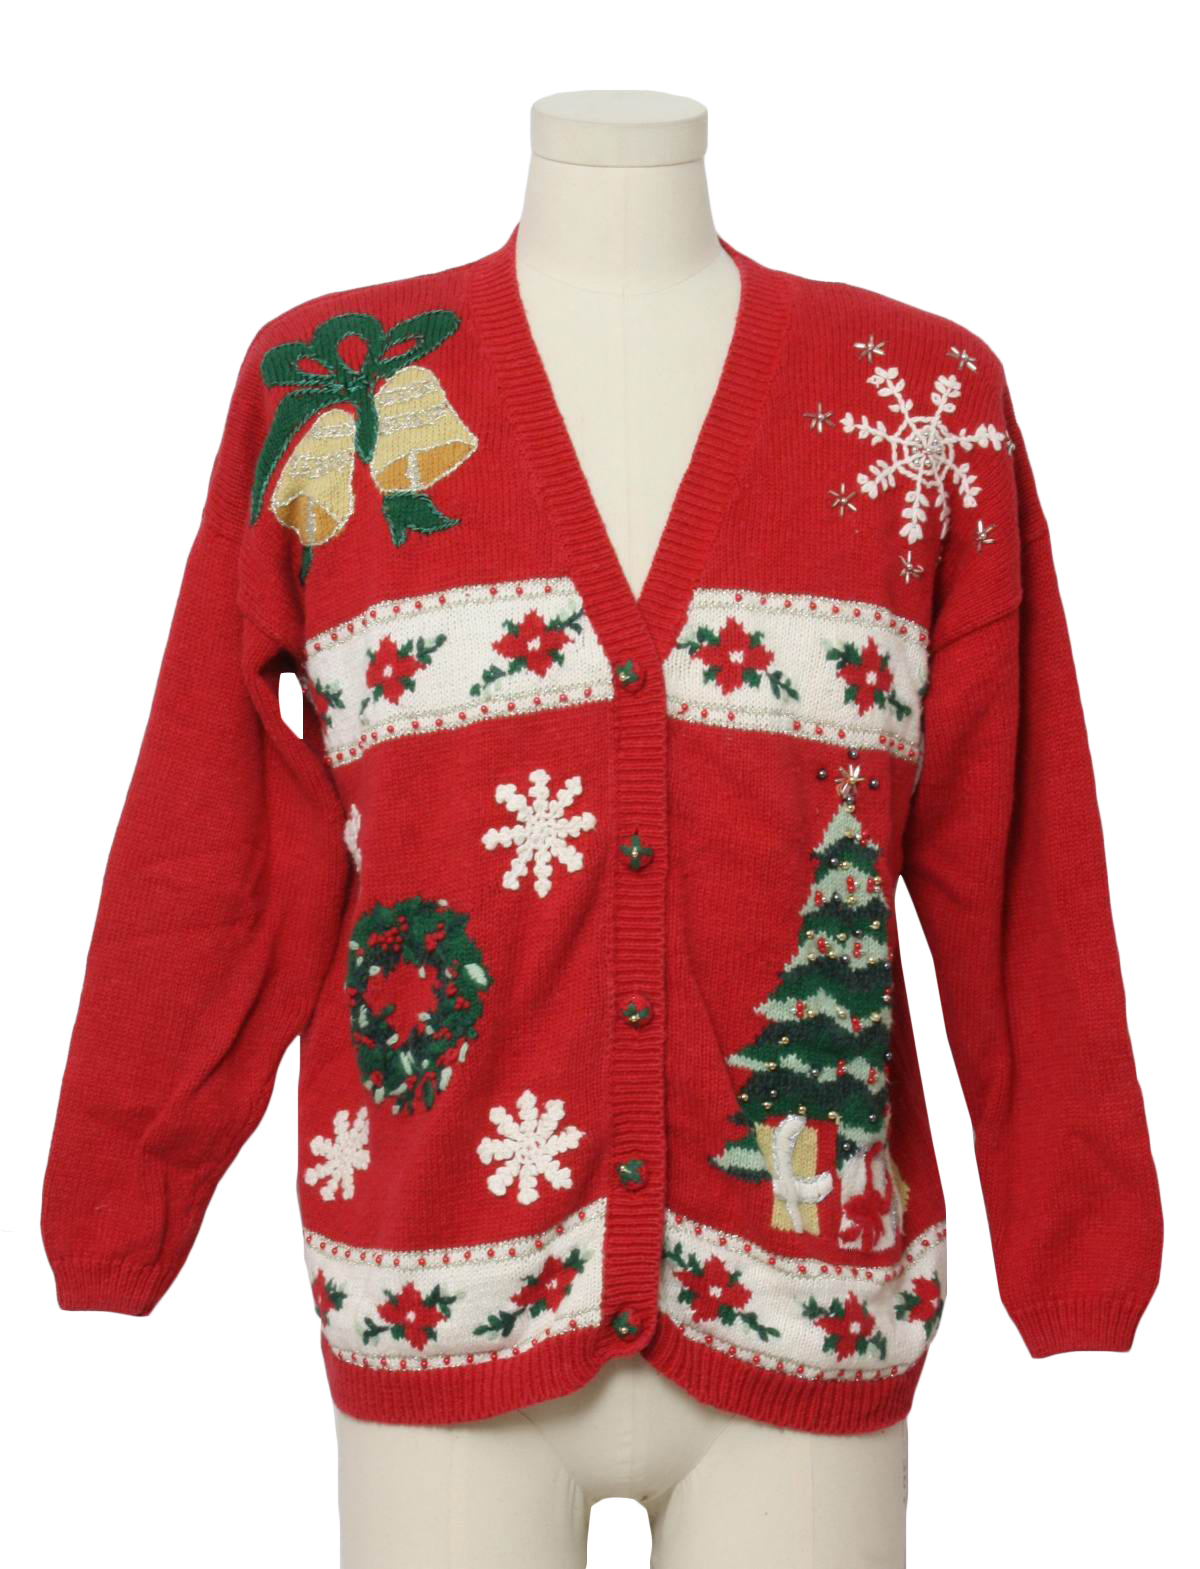 Ugly Christmas Cardigan Sweater: retro look -Carly St. Claire- Unisex ...